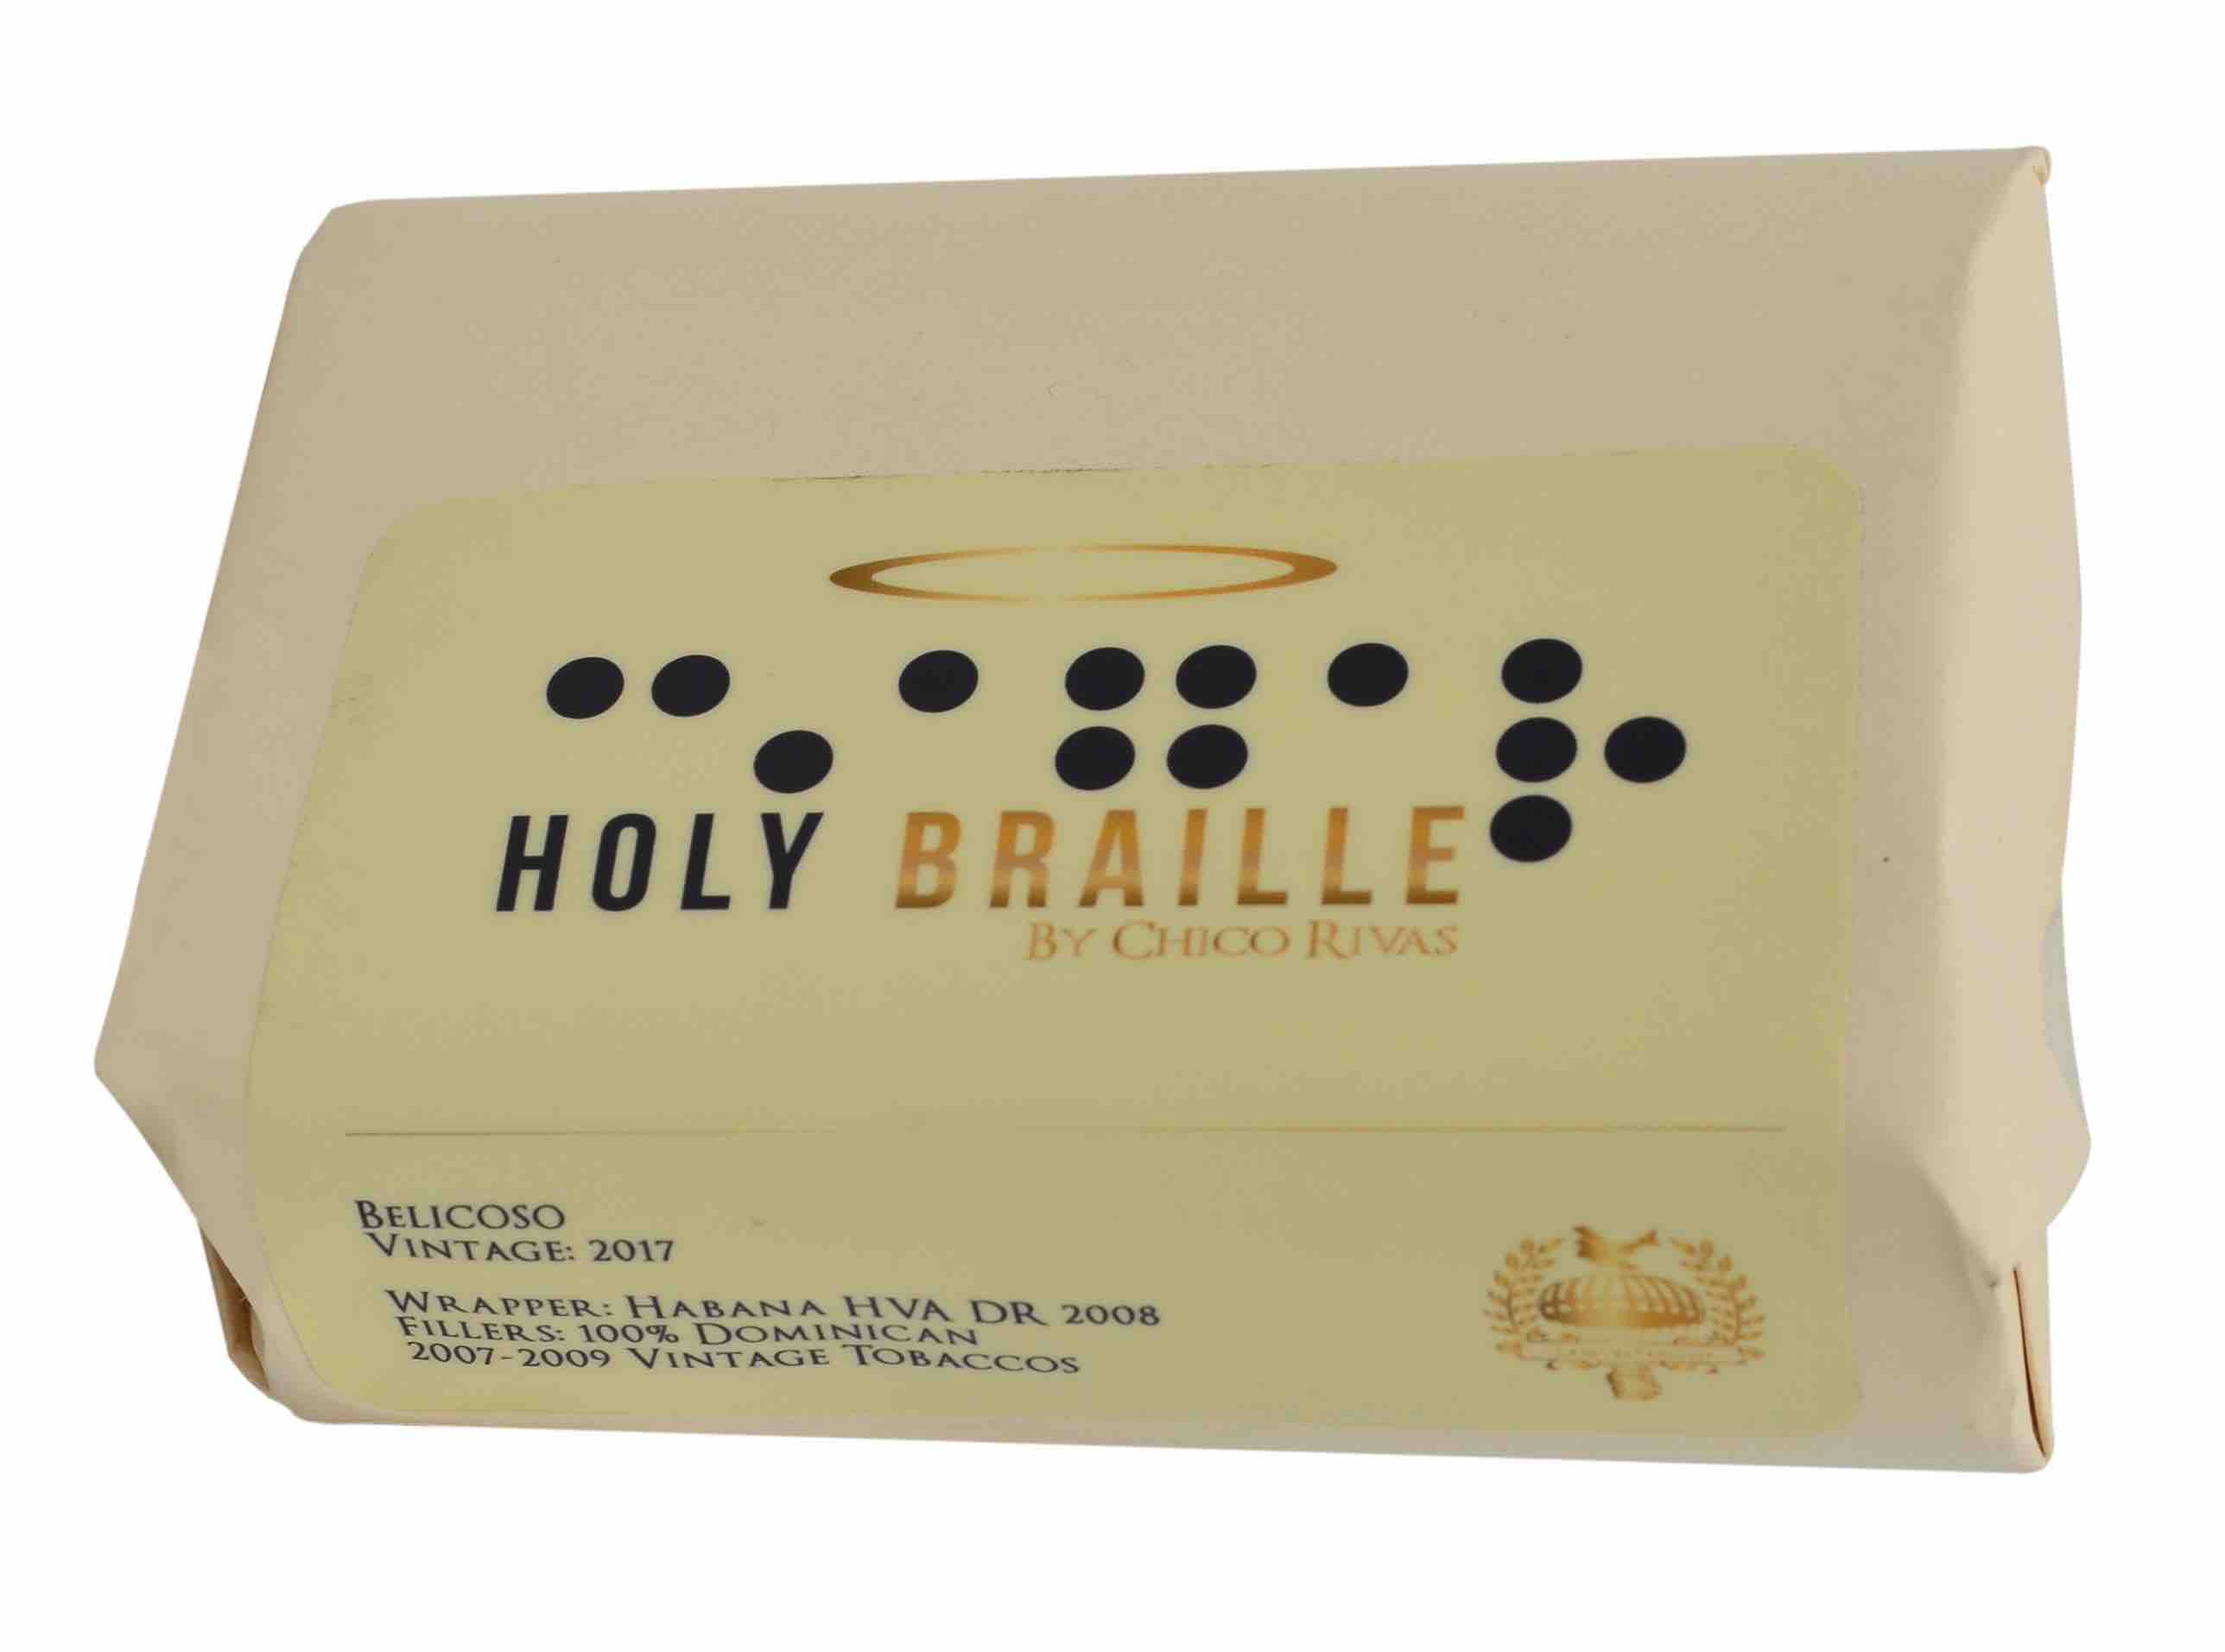 Lost and Found Holy Braille by Chico Rivas